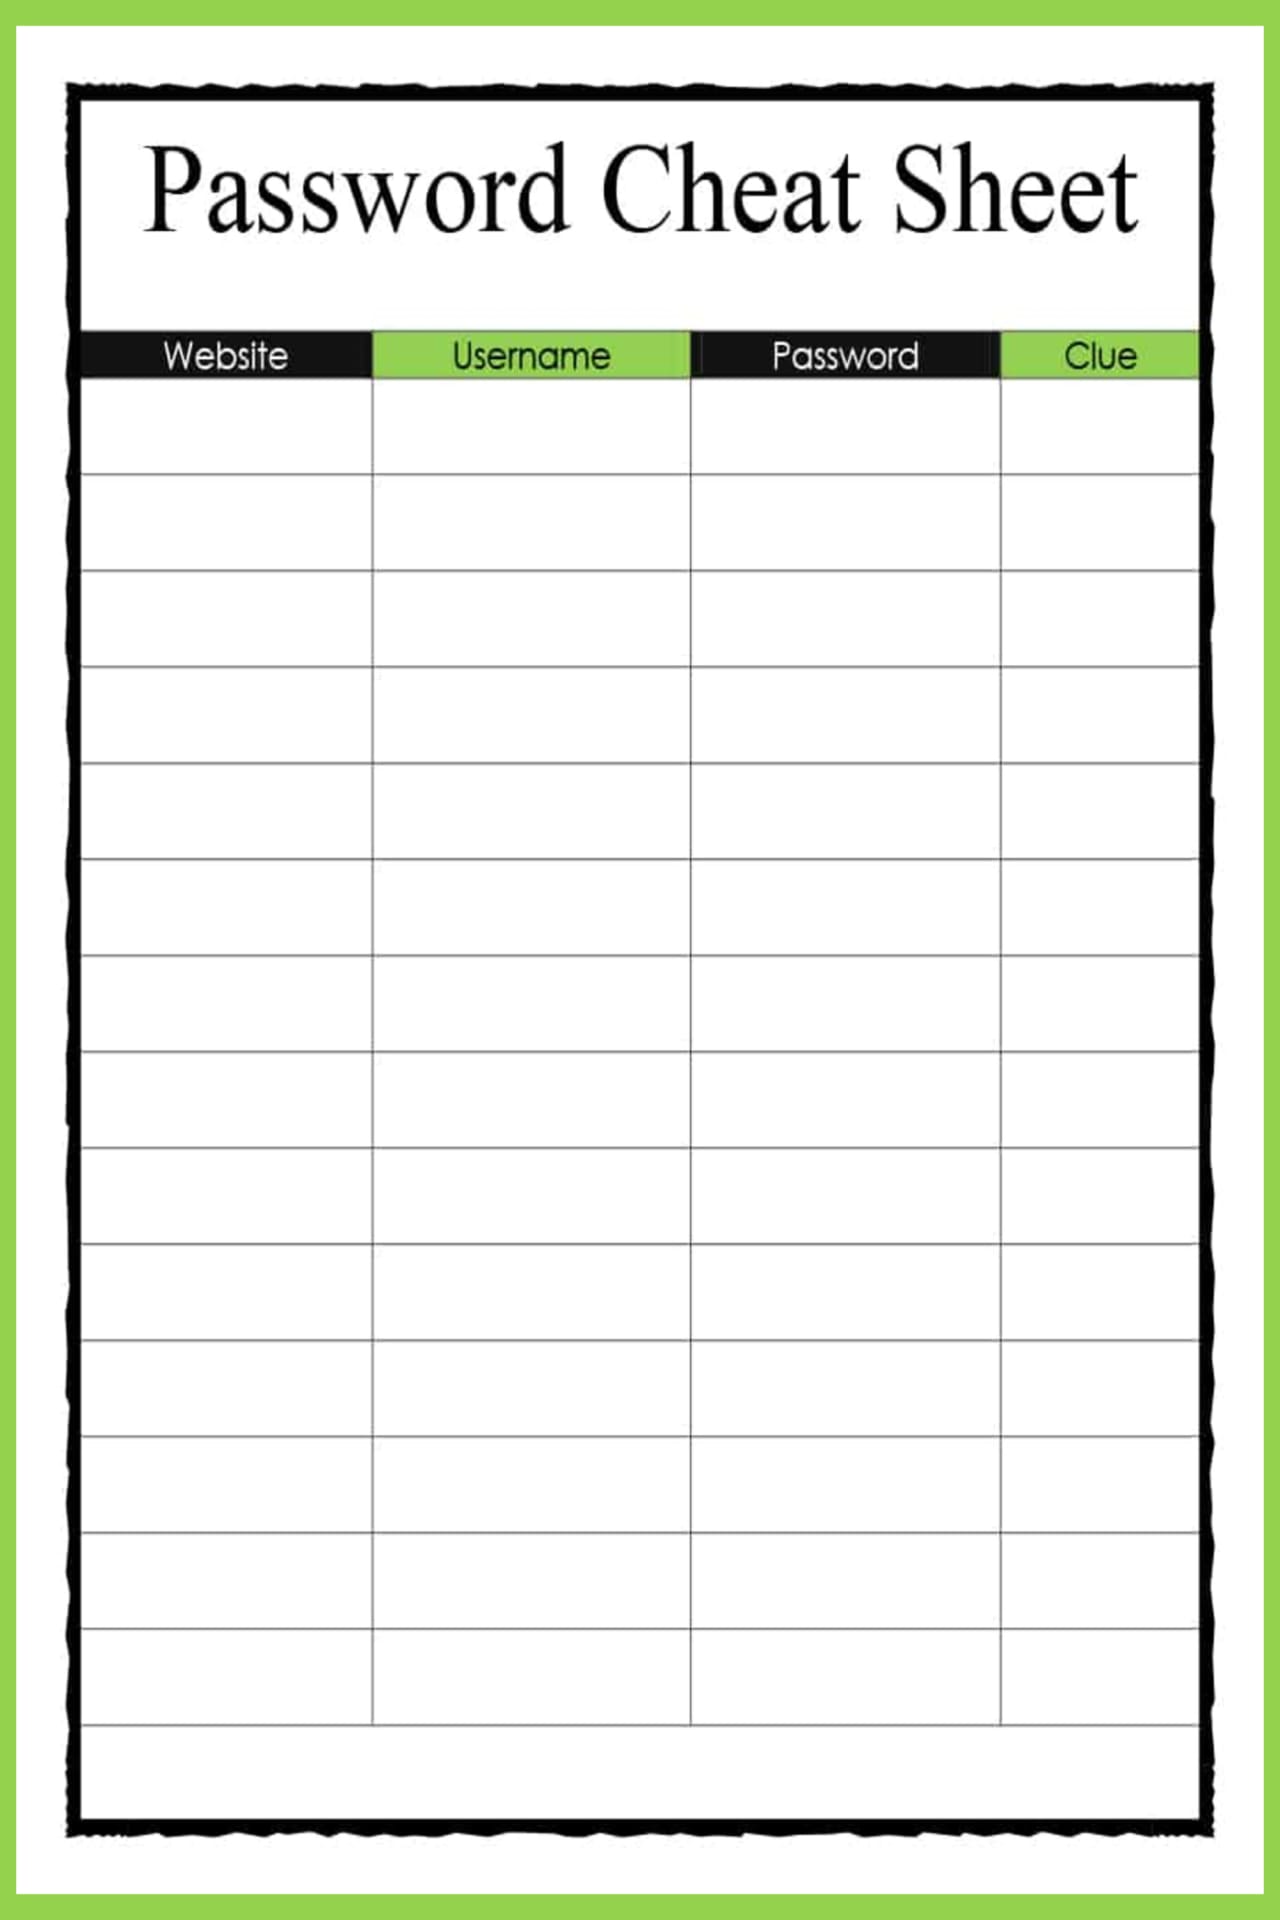 Password cheat sheet template - Free Password Trackers and Password Keeper Printable PDFs - how to organize website passwords on paper with a printable password keeper to make a DIY password journal or password organizer binder - it's like your own password vault to track all your online passwords!  Download your free printable password organizers worksheets to make a DIY password book with these free home organizing printables